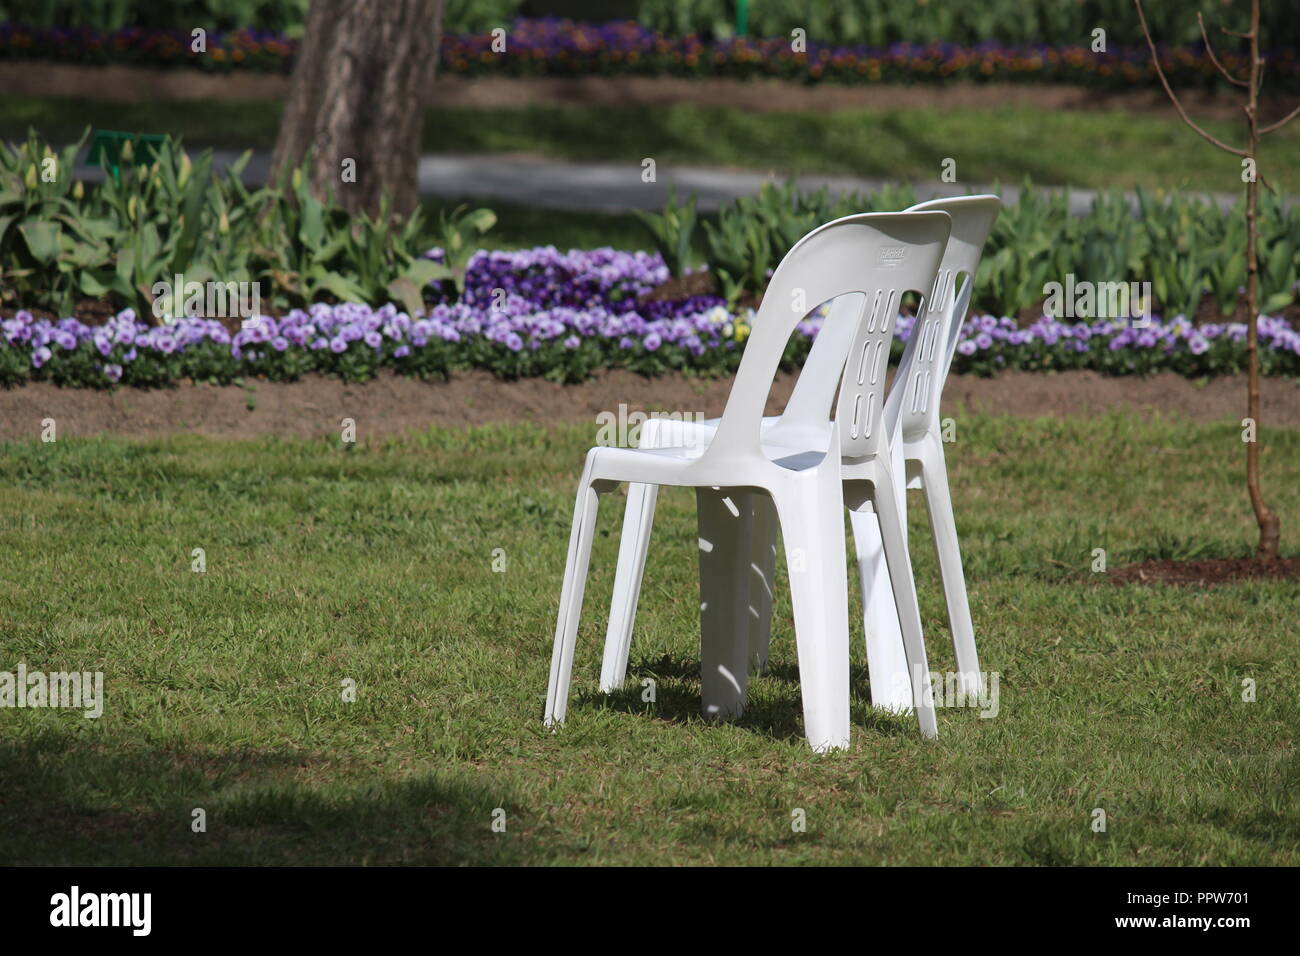 A Pair Of Plastic Chairs Which Would Make A Great Picnic Spot At